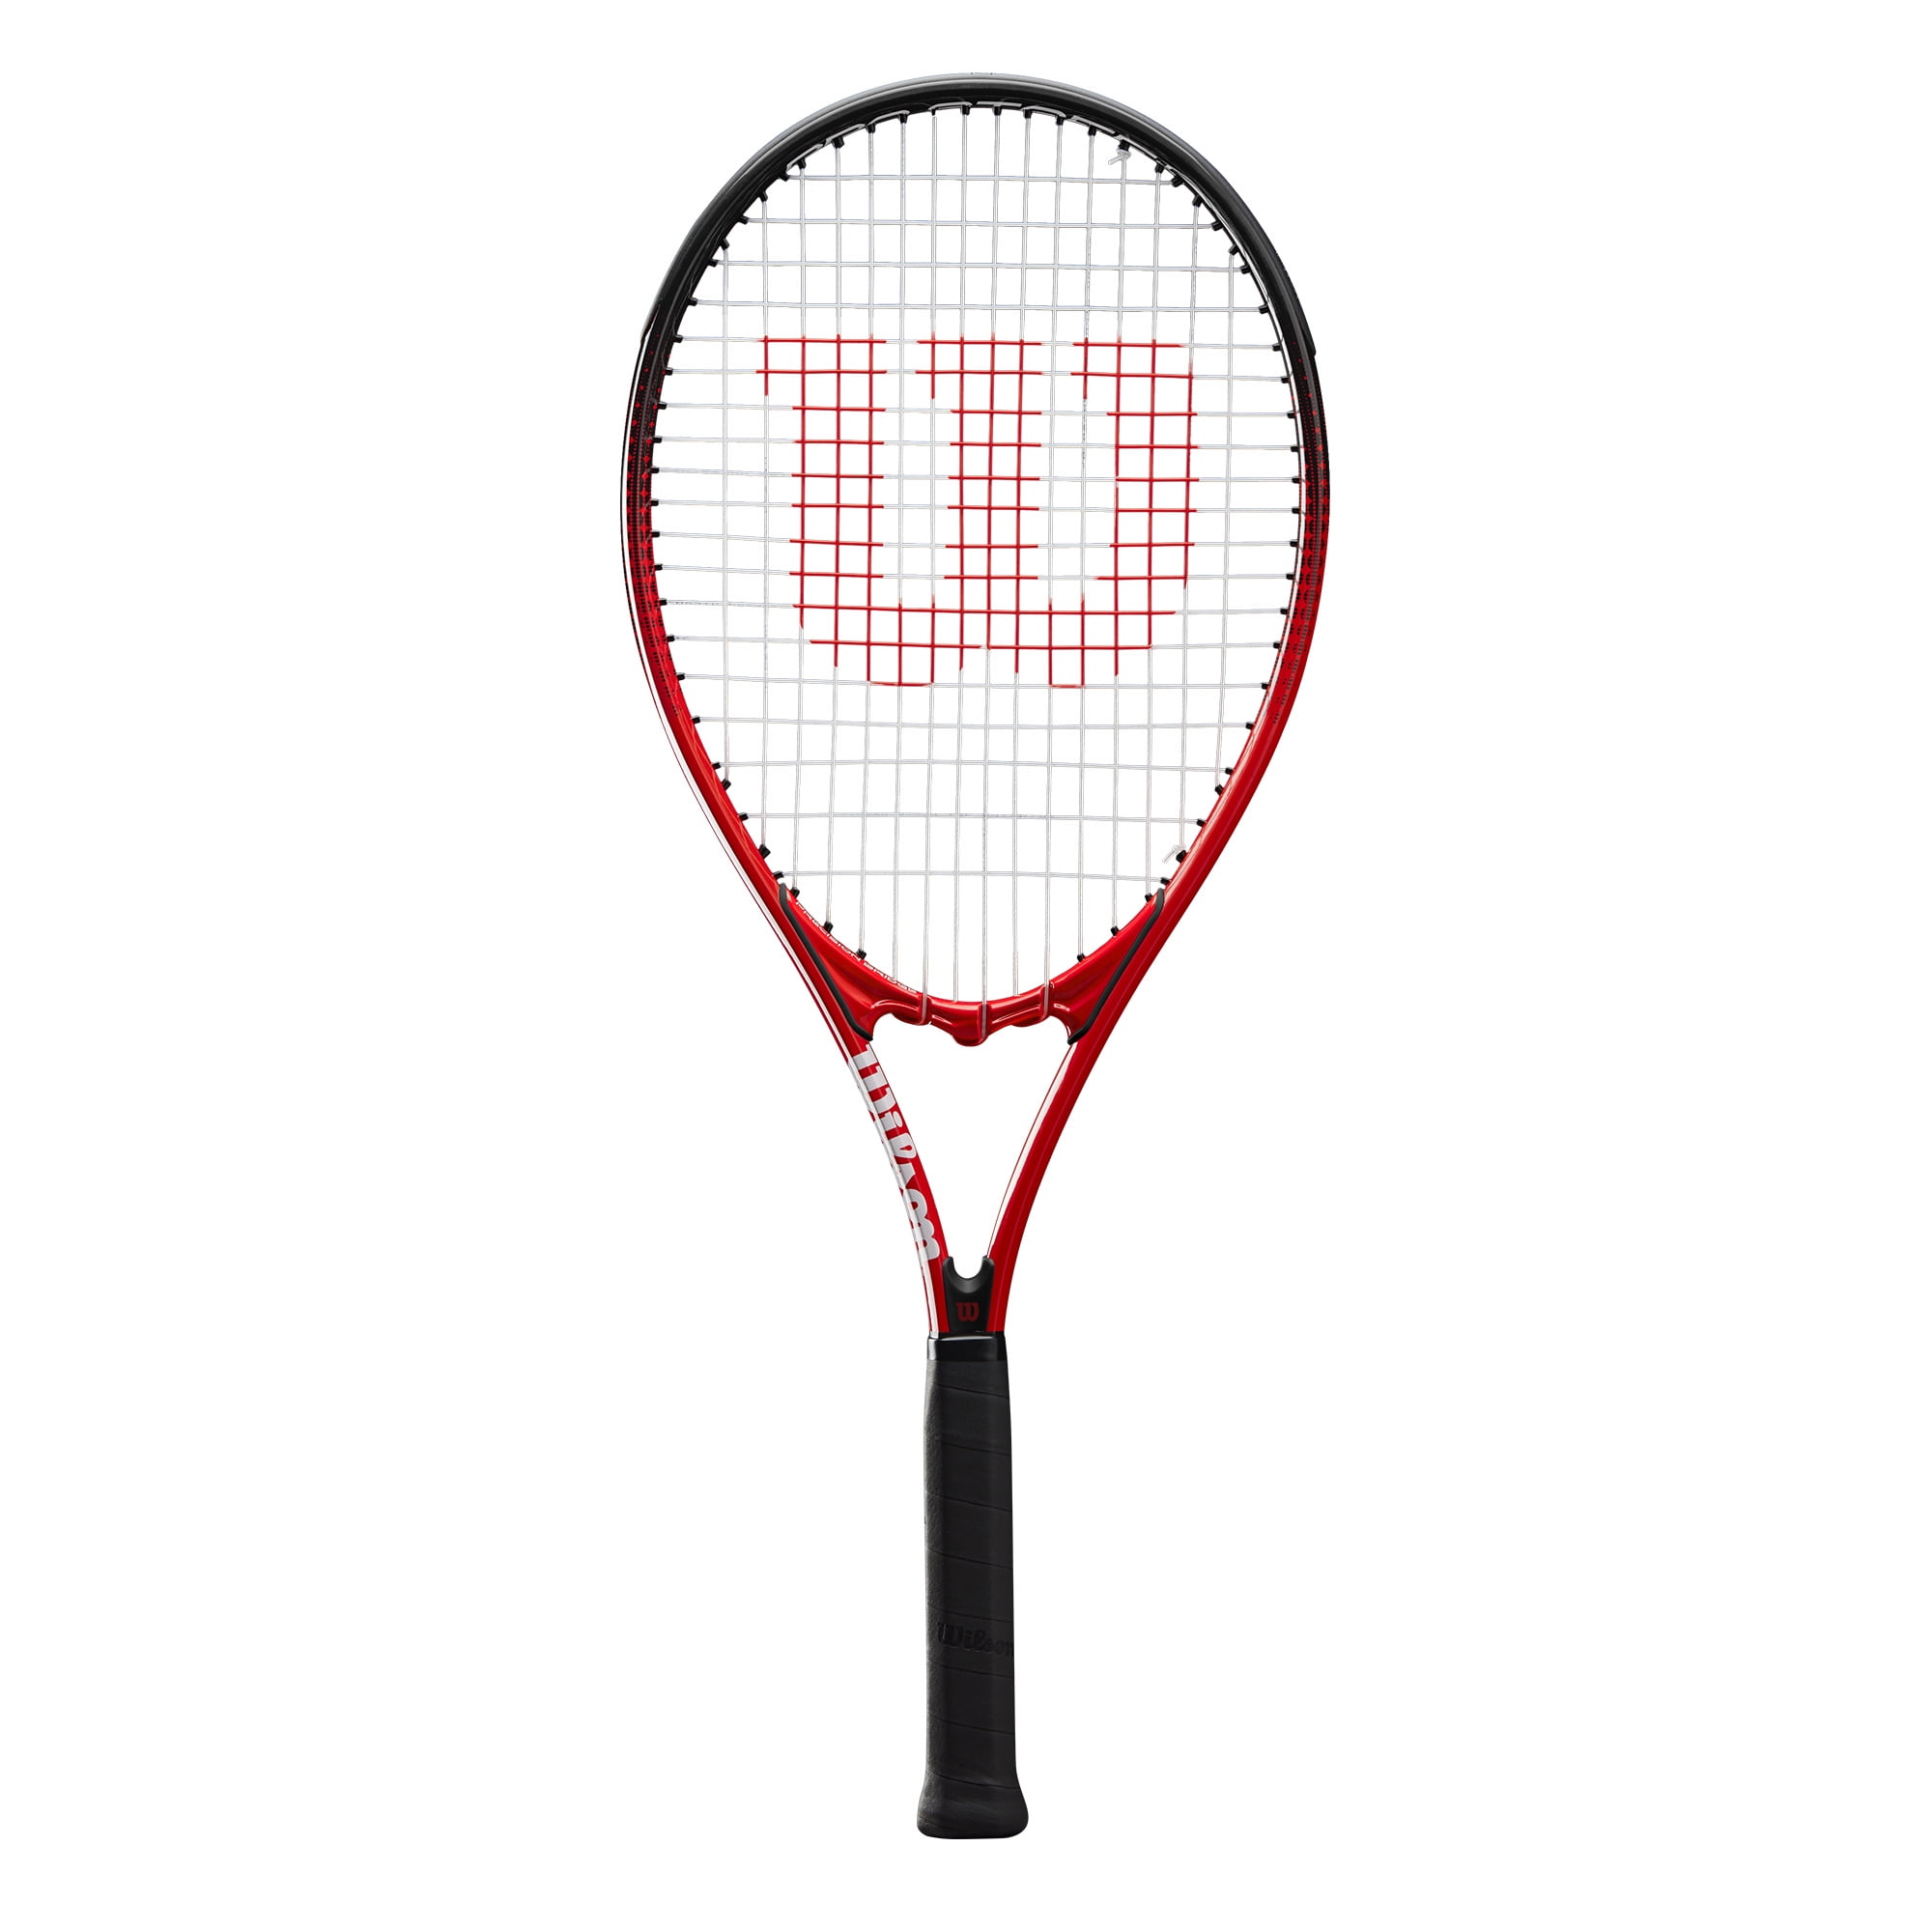 Good Wilson Tennis Racket N Tour Two105 4 1/4" Ship From Japan K2 for sale online 